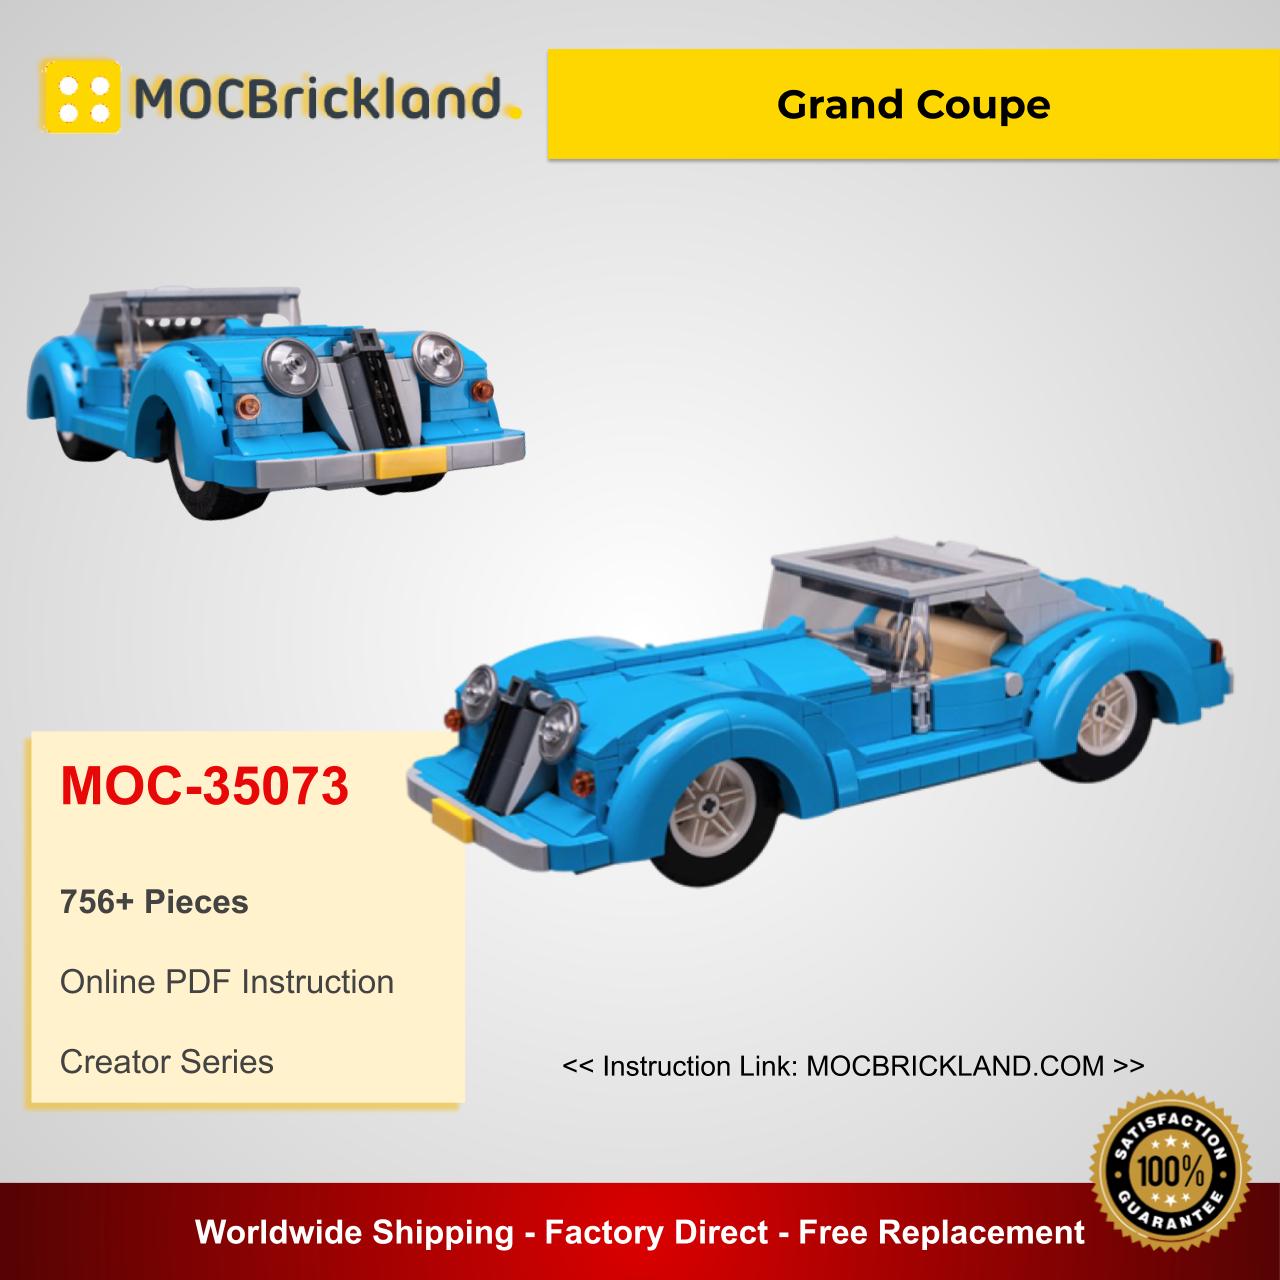 Grand Coupe MOC 35073 Creator Alternative 10252 Designed By On Bricking With 756 Pieces - MOC Brick Land